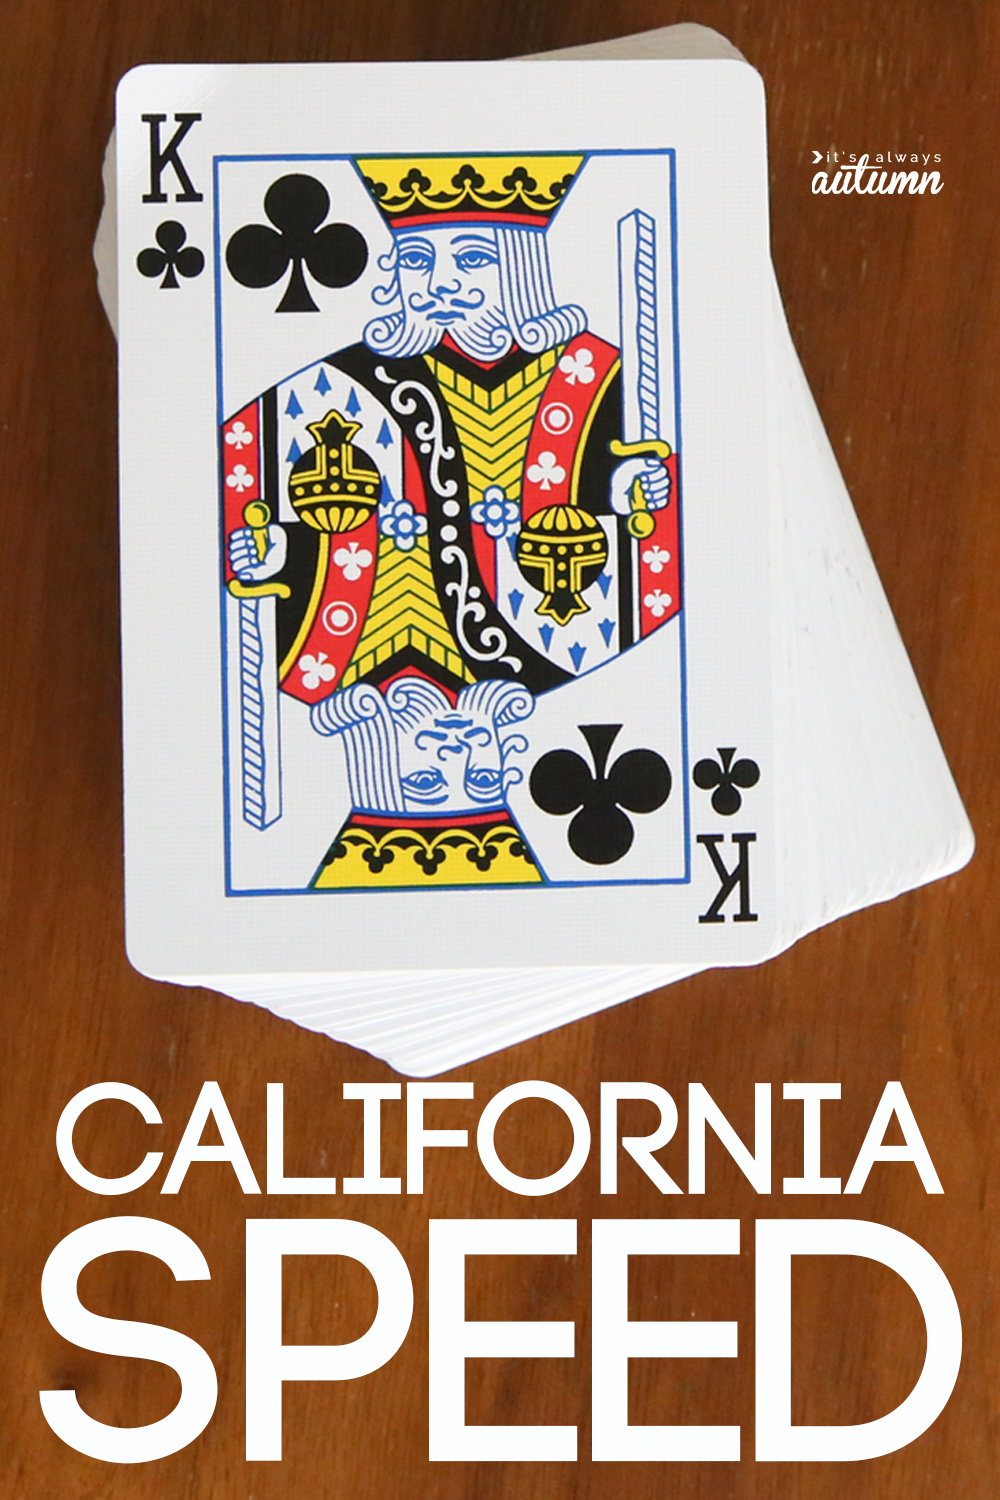 California speed is a fun, easy to learn and fast paced card game! Great game to teach your kids this summer.